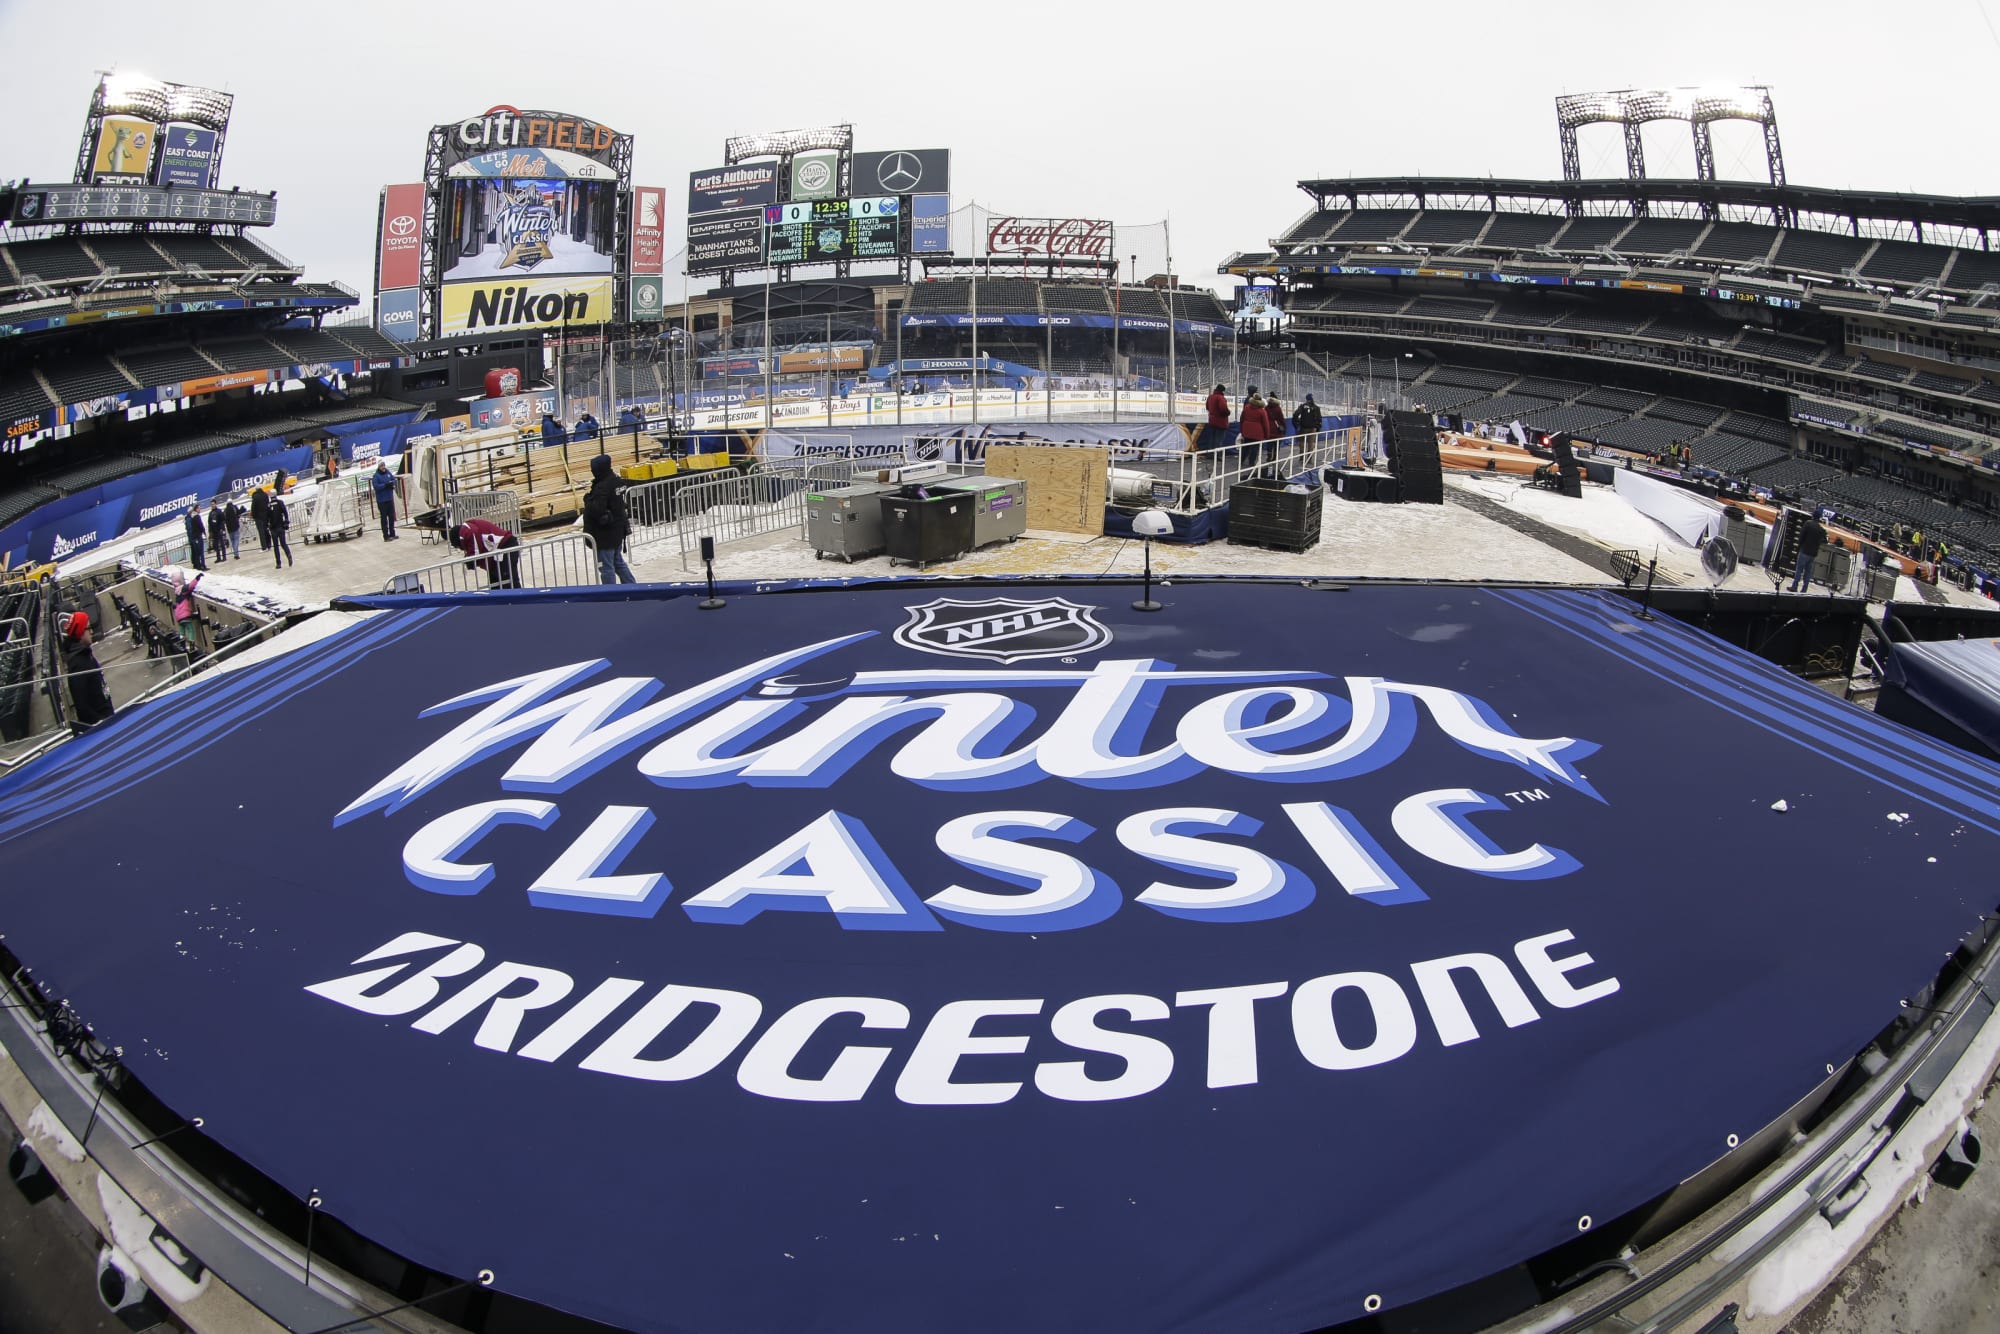 Inside the NHL: Better balance still needed for Winter Classic sites, teams